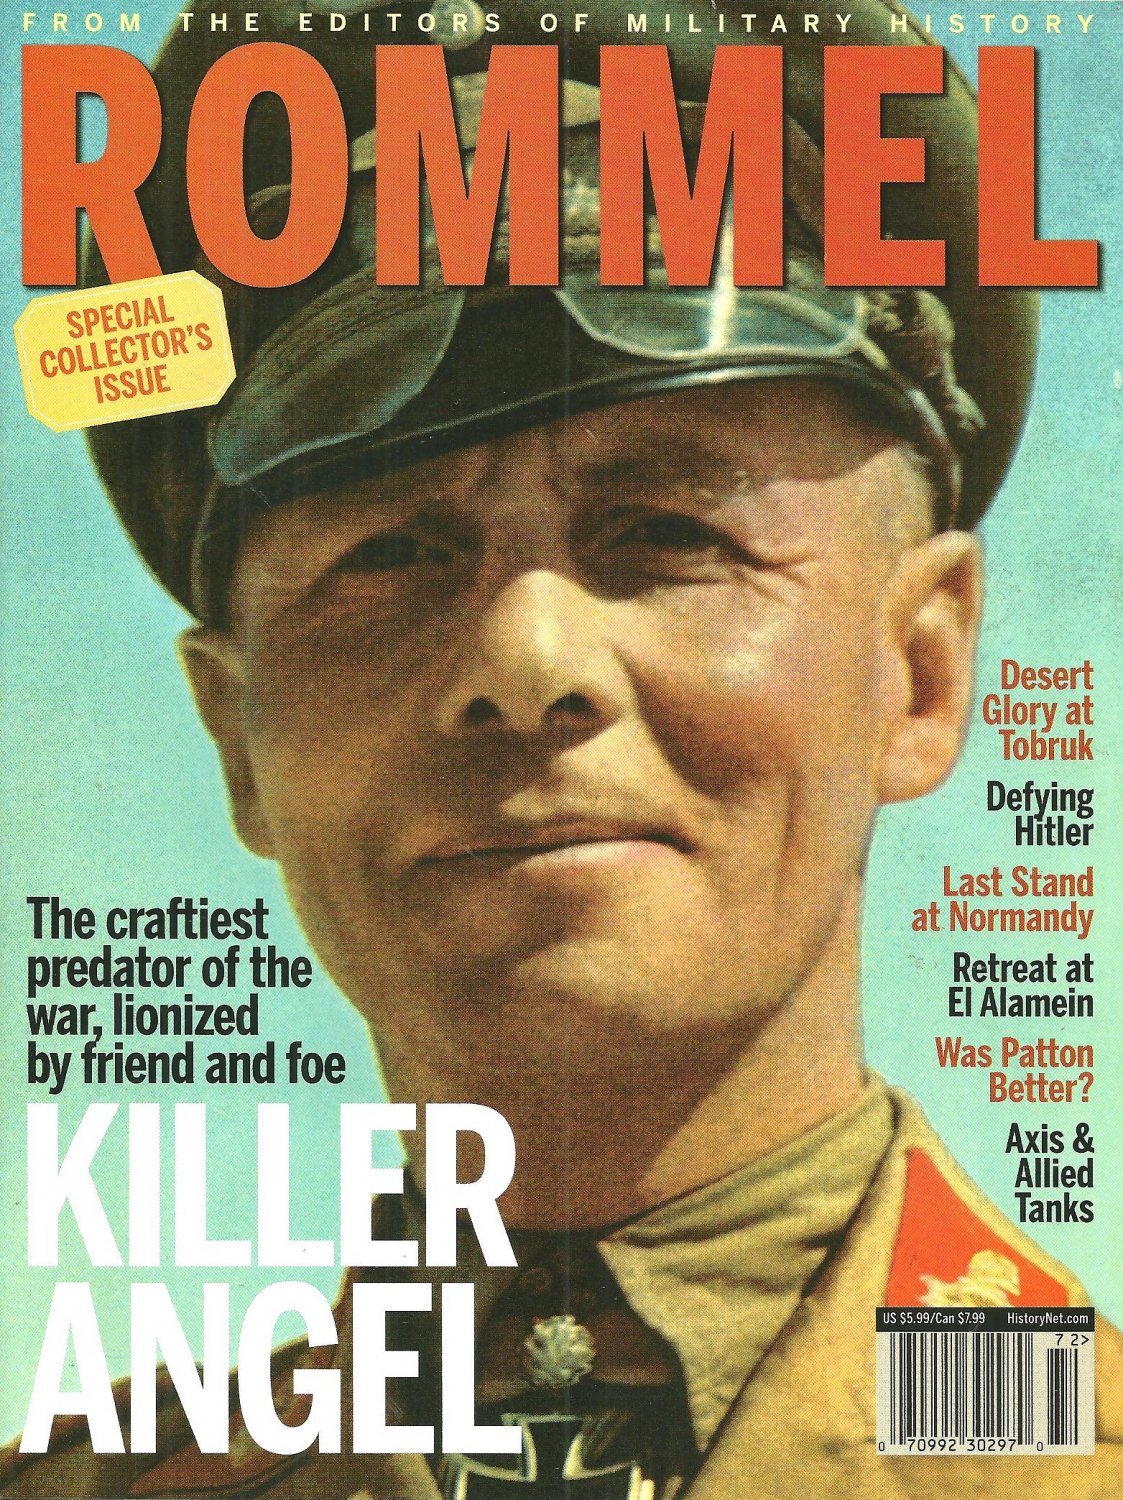 Military History Magazine Presents ROMMEL Special Collector's Issue KILLER ANGEL